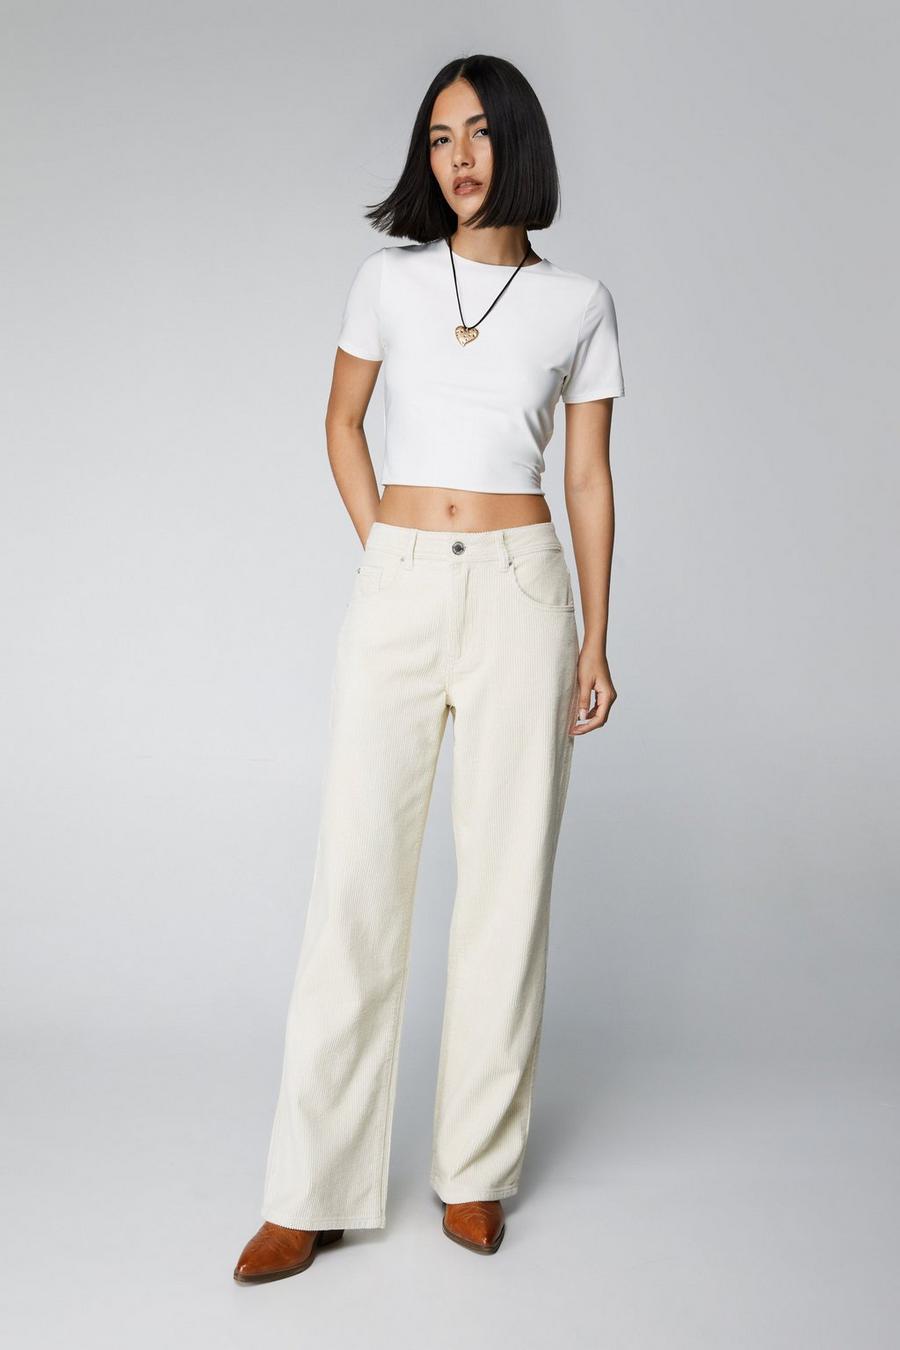 What's New | Shop New Arrivals & Just In | Nasty Gal